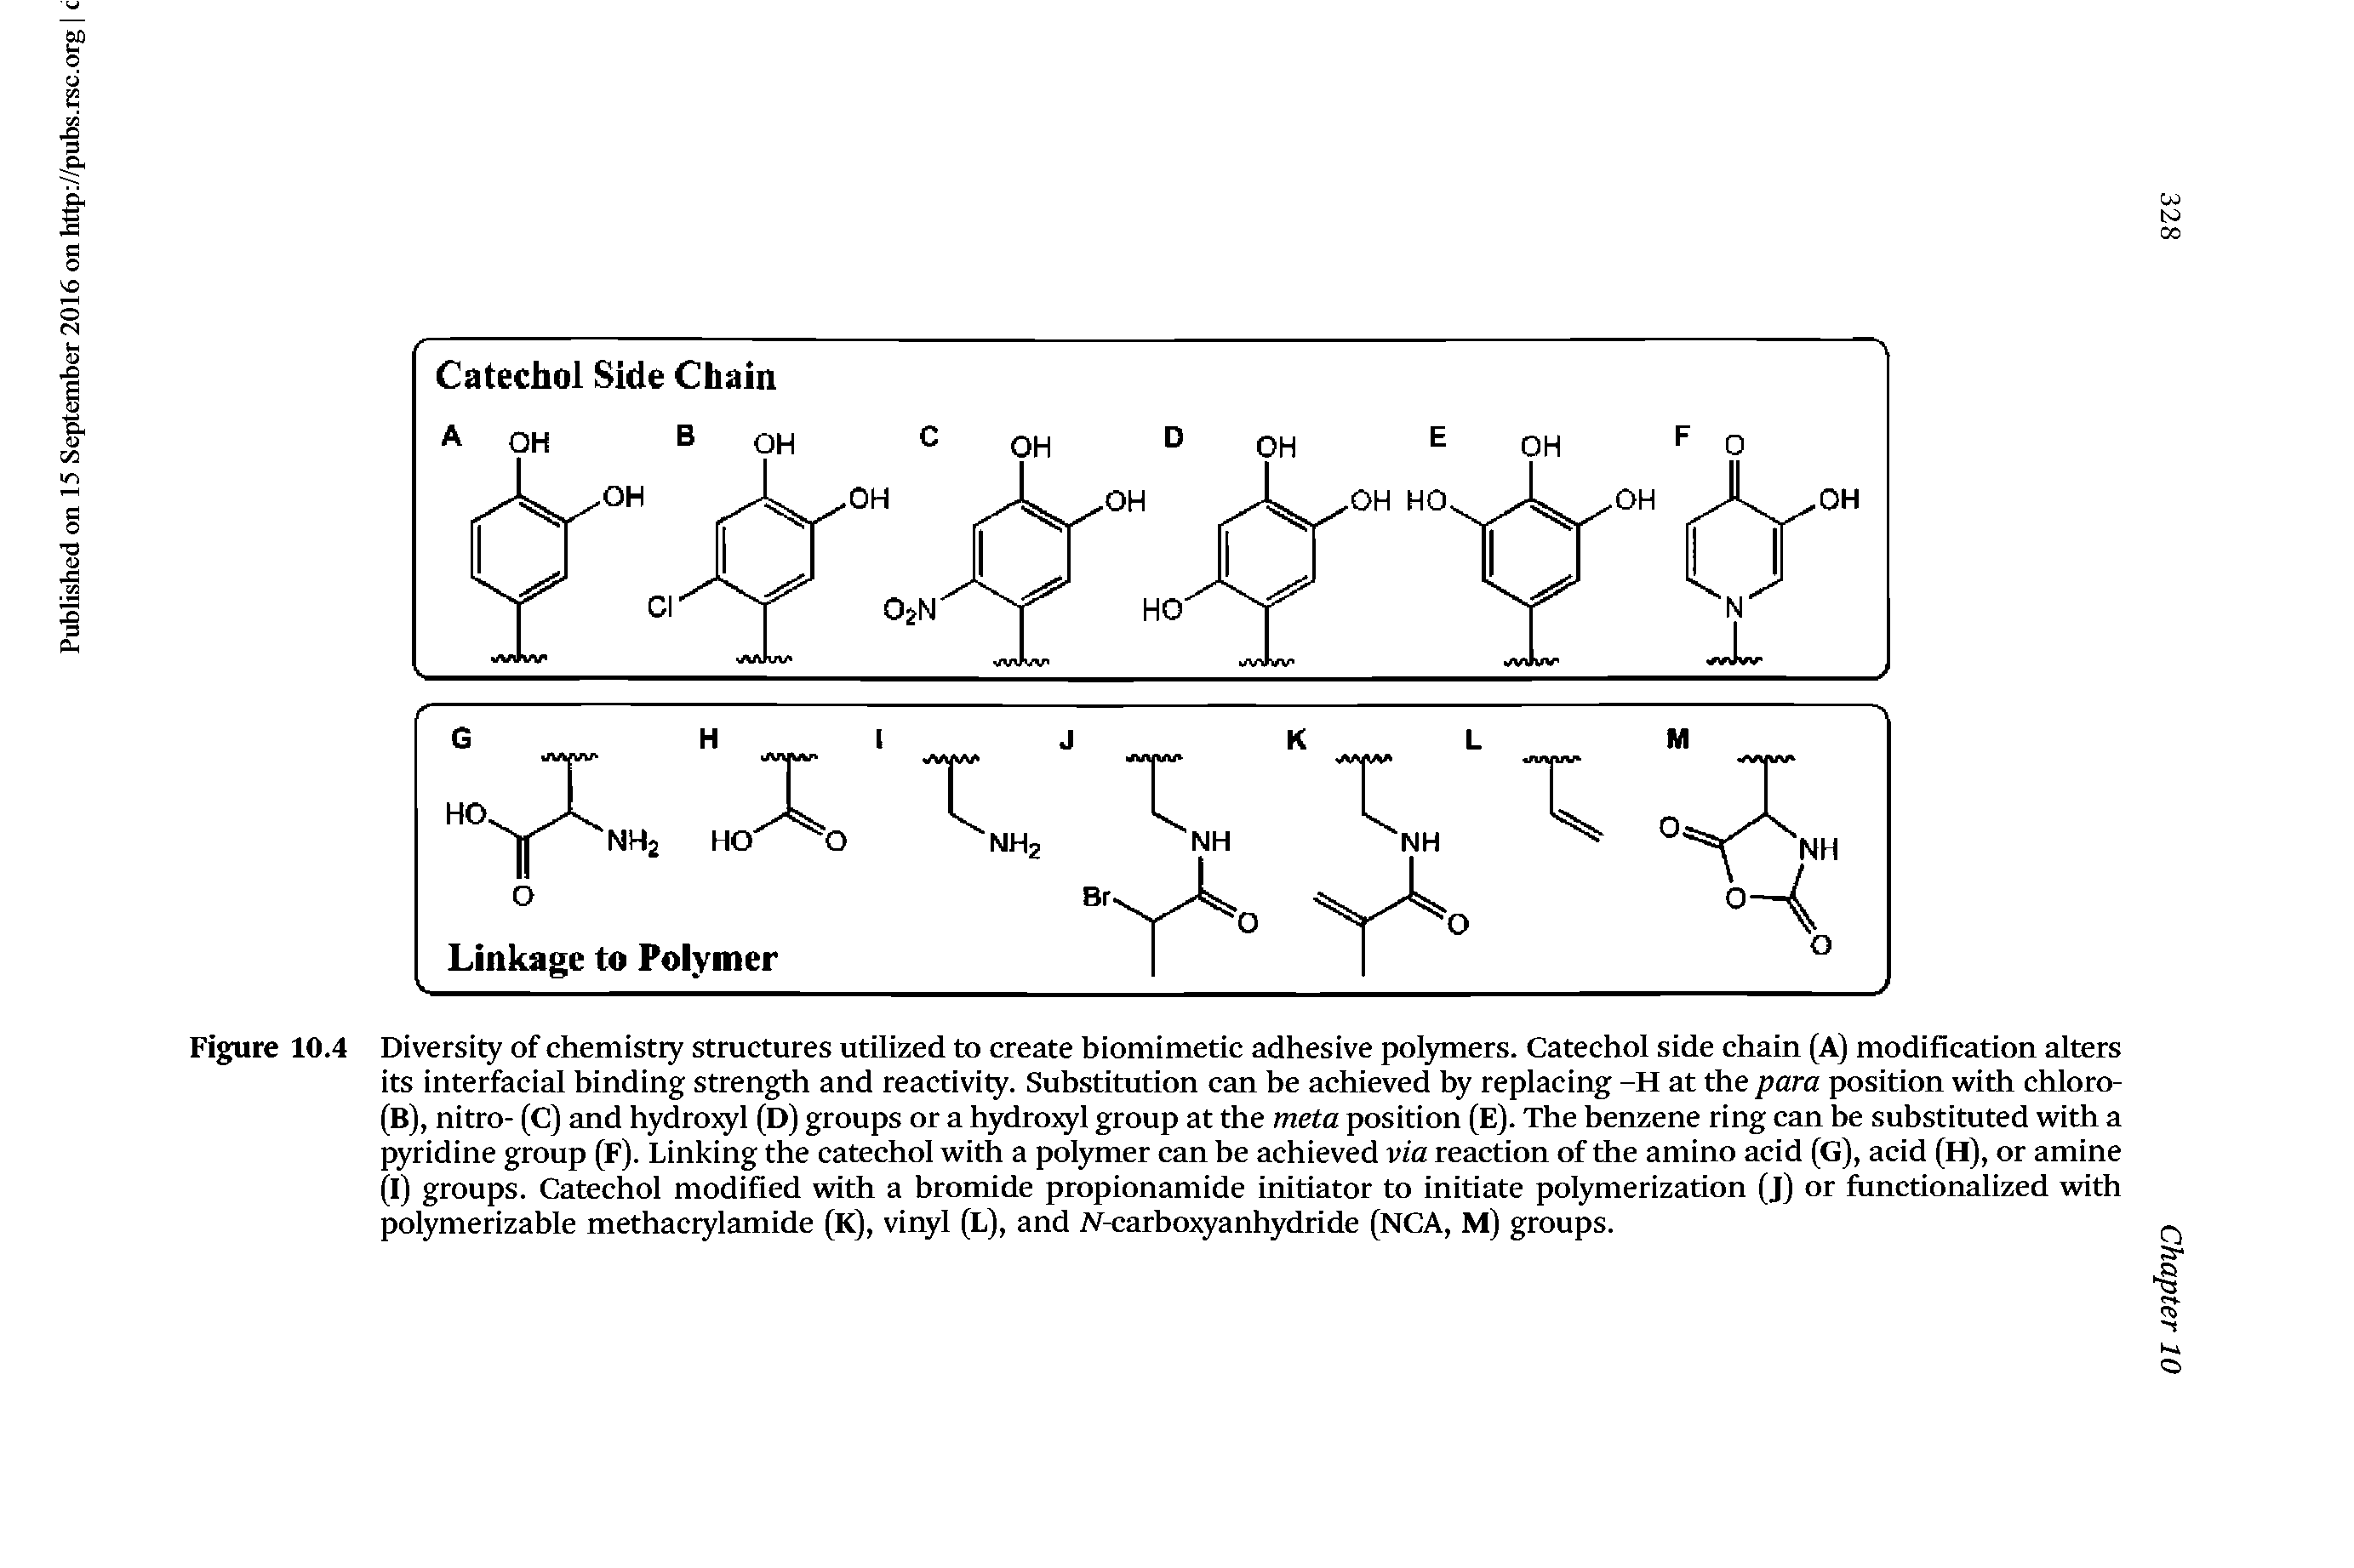 Figure 10.4 Diversity of chemistiy structures utilized to create biomimetic adhesive polymers. Catechol side chain (A) modification alters its interfacial binding strength and reactivity. Substitution can be achieved by replacing -H at the para position with chloro-(B), nitro- (C) and hydrojyl (D) groups or a hydro)yl group at the meta position (E). The benzene ring can be substituted with a pyridine group (F). Linking the catechol with a polymer can be achieved via reaction of the amino acid (G), acid (H), or amine (I) groups. Catechol modified with a bromide propionamide Initiator to initiate polymerization (J) or functionalized with polymerizable methacrylamide (K), vinyl (L), and M-carboxyanhydride (NCA, M) groups.